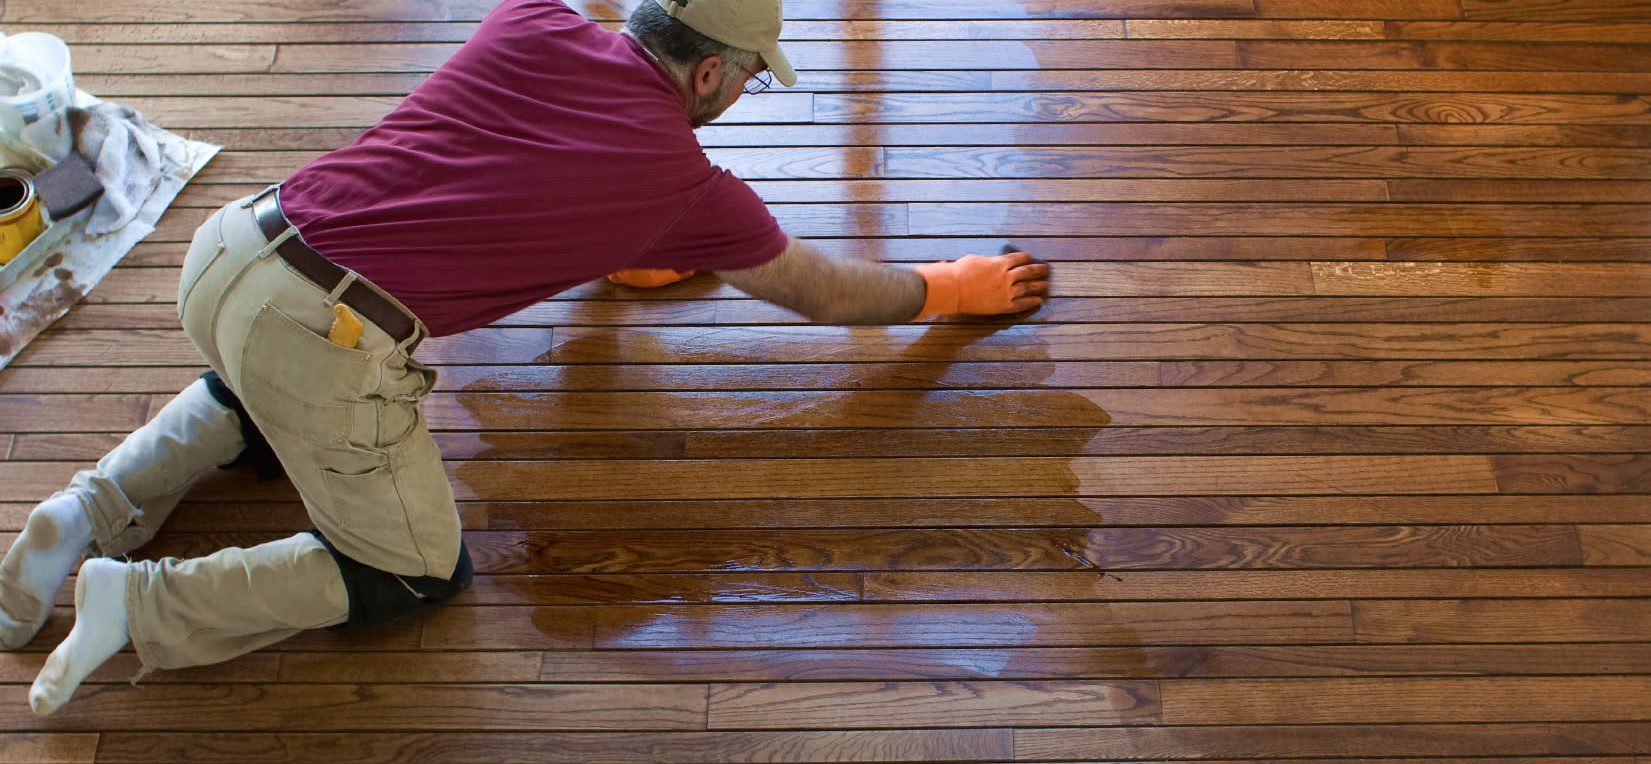 How-To-Restore-Wood-Flooring-In-4-Steps.|How-To-Restore-Wood-Flooring-In-4-Steps.|sanding-the-floor